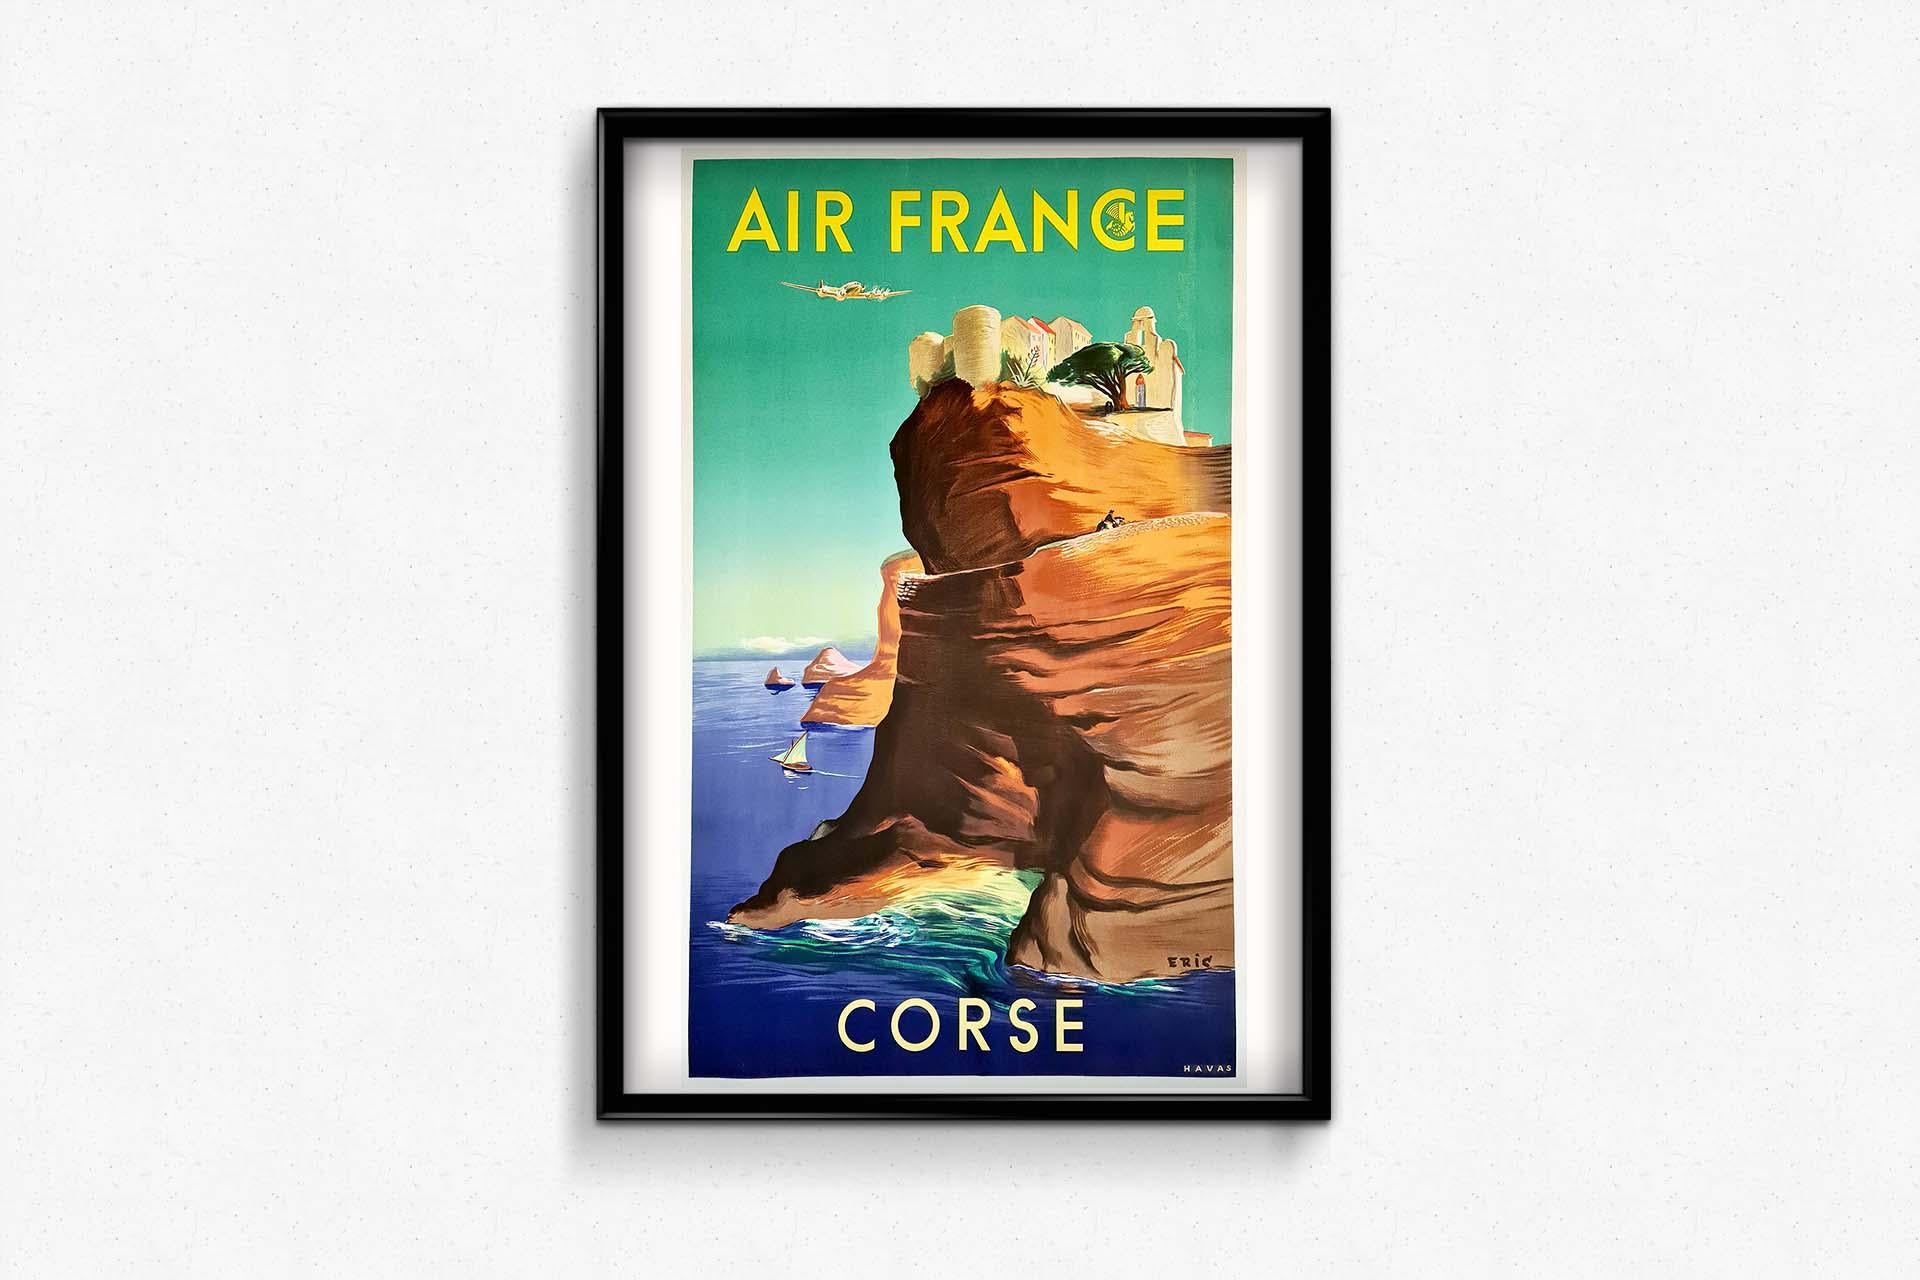 Very nice poster of Eric ( 1915 - 1997 ) for the trips to Corsica with Air France.
Go to the island of beauty with Air France and its Lockheed constellation.

Published by : Havas and printed in France